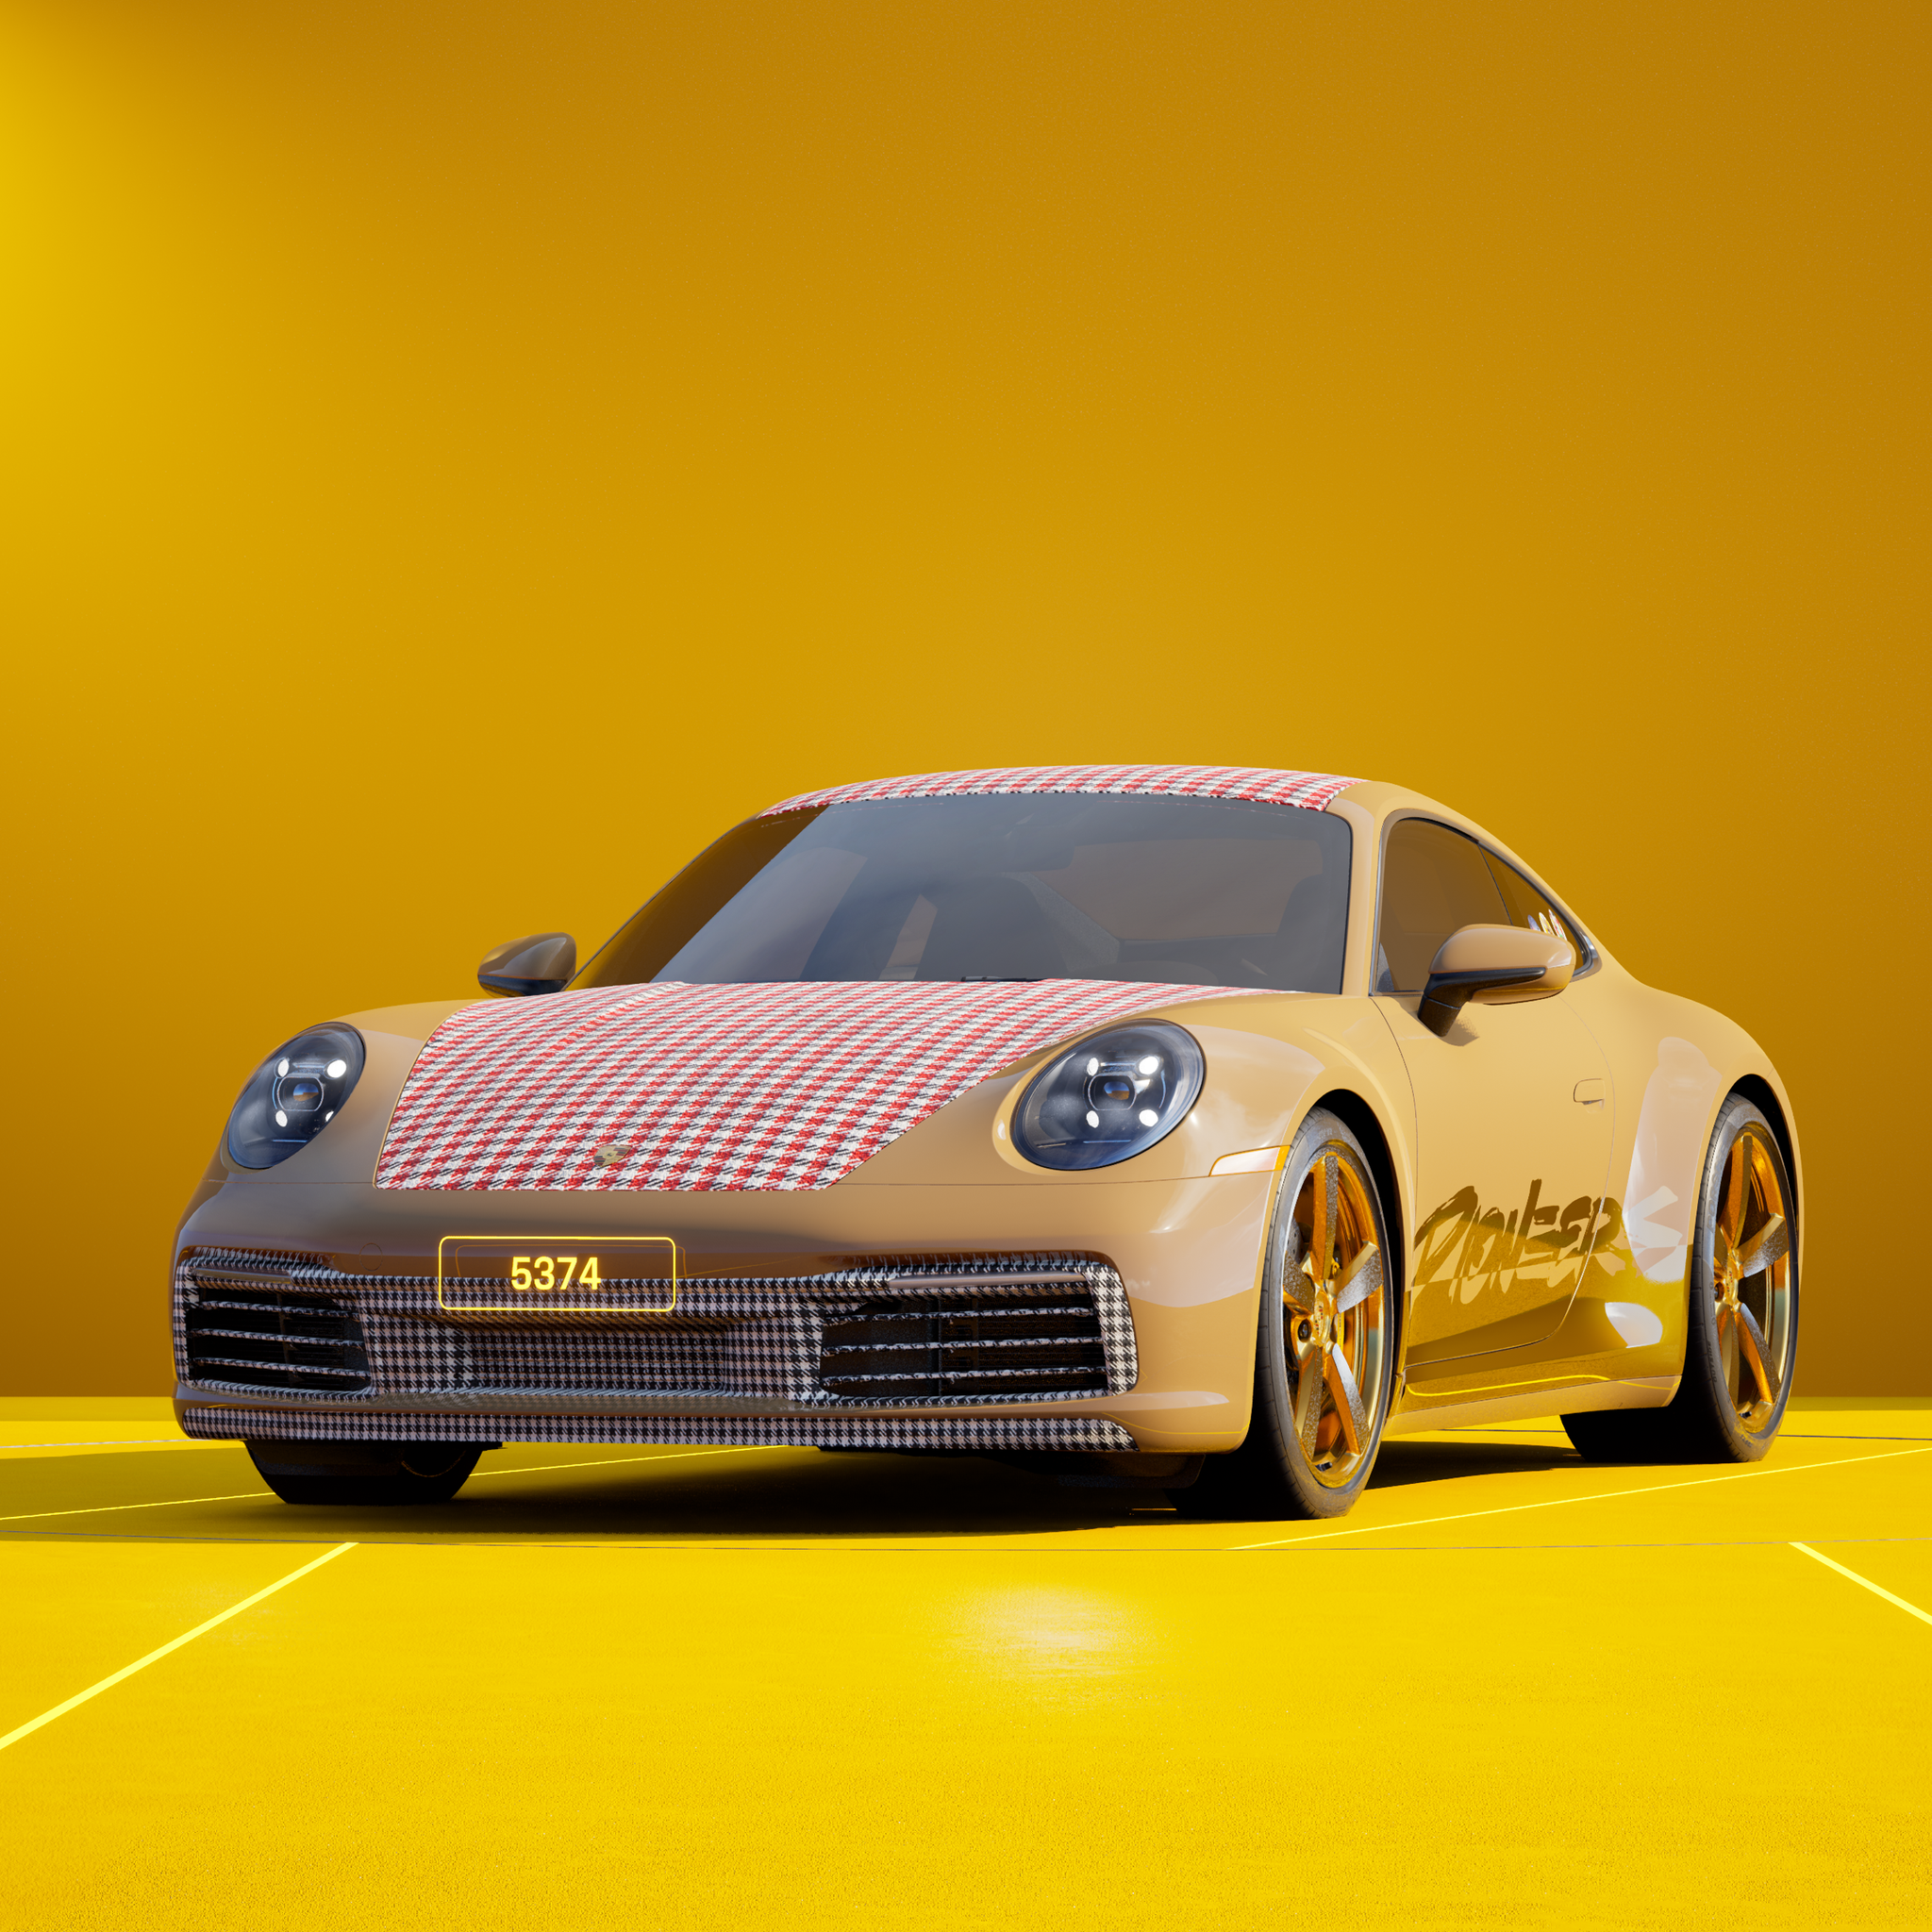 The PORSCHΞ 911 5374 image in phase